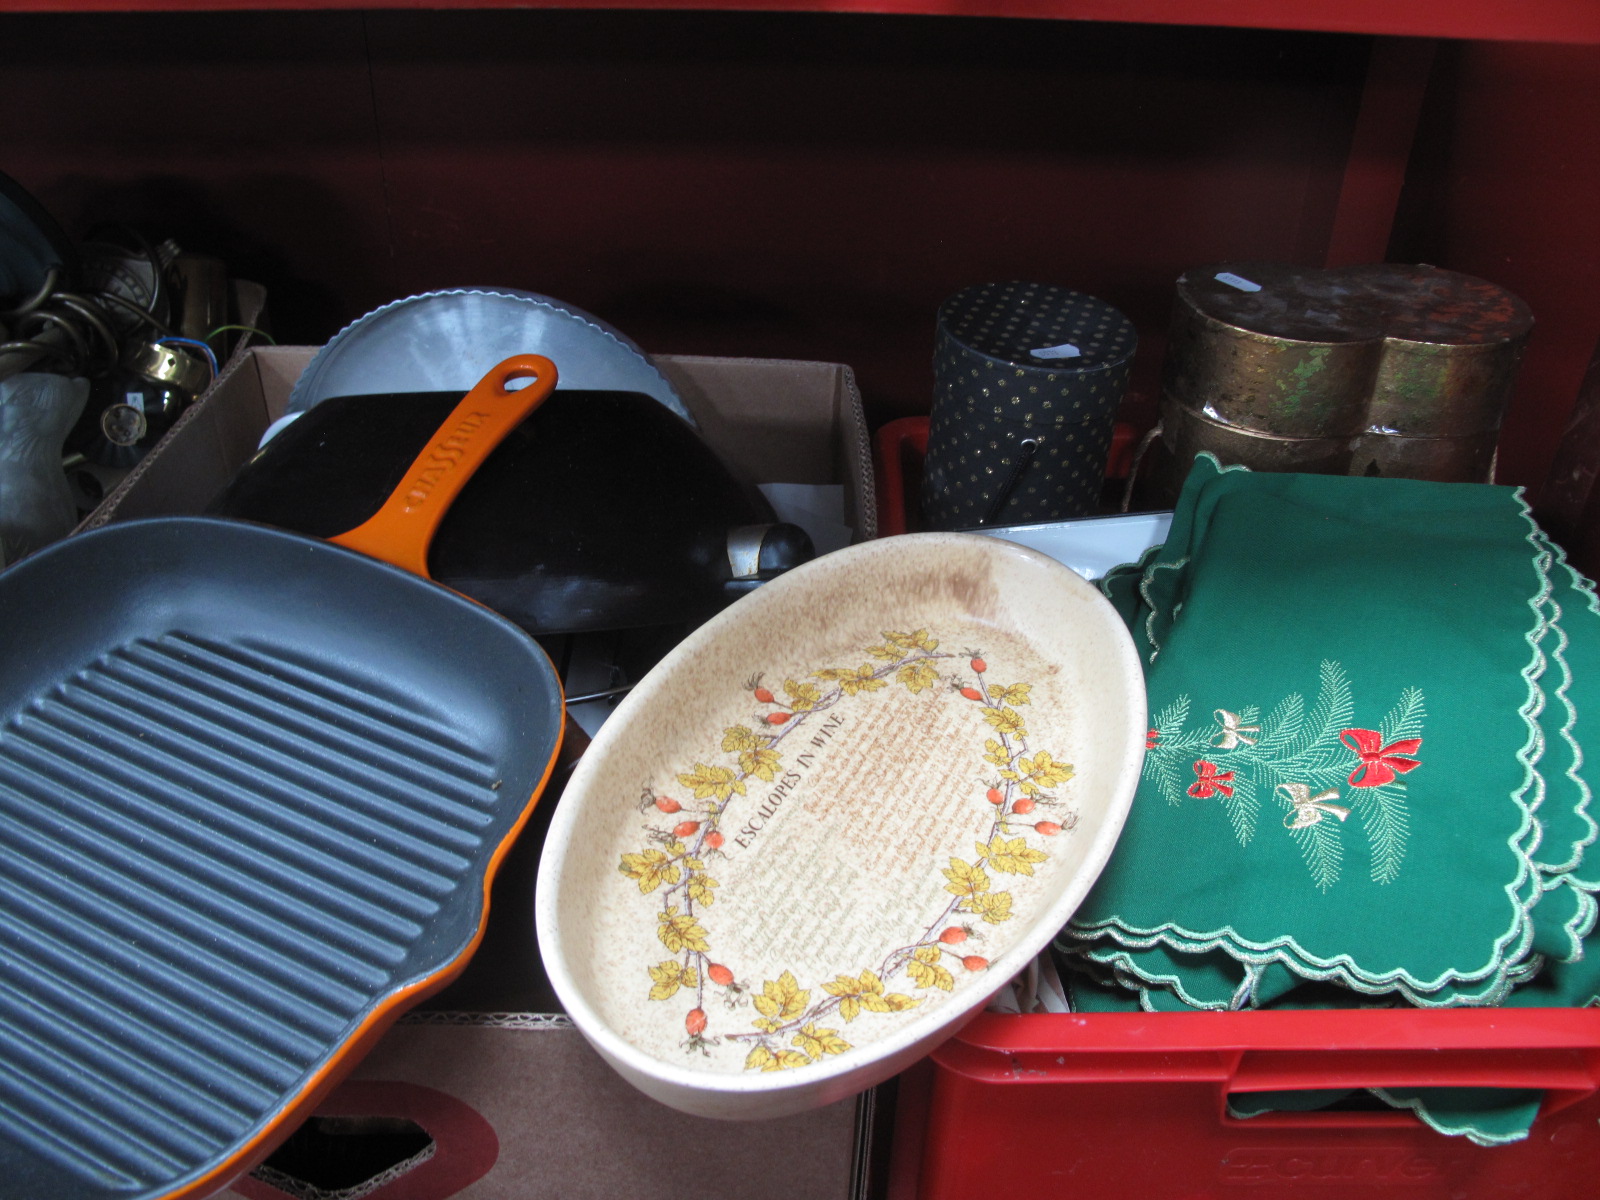 Kitchenware, including Invicta griddle, Tefal Wok, Le Creuset pan, Screwfull, cutlery, etc:- Two